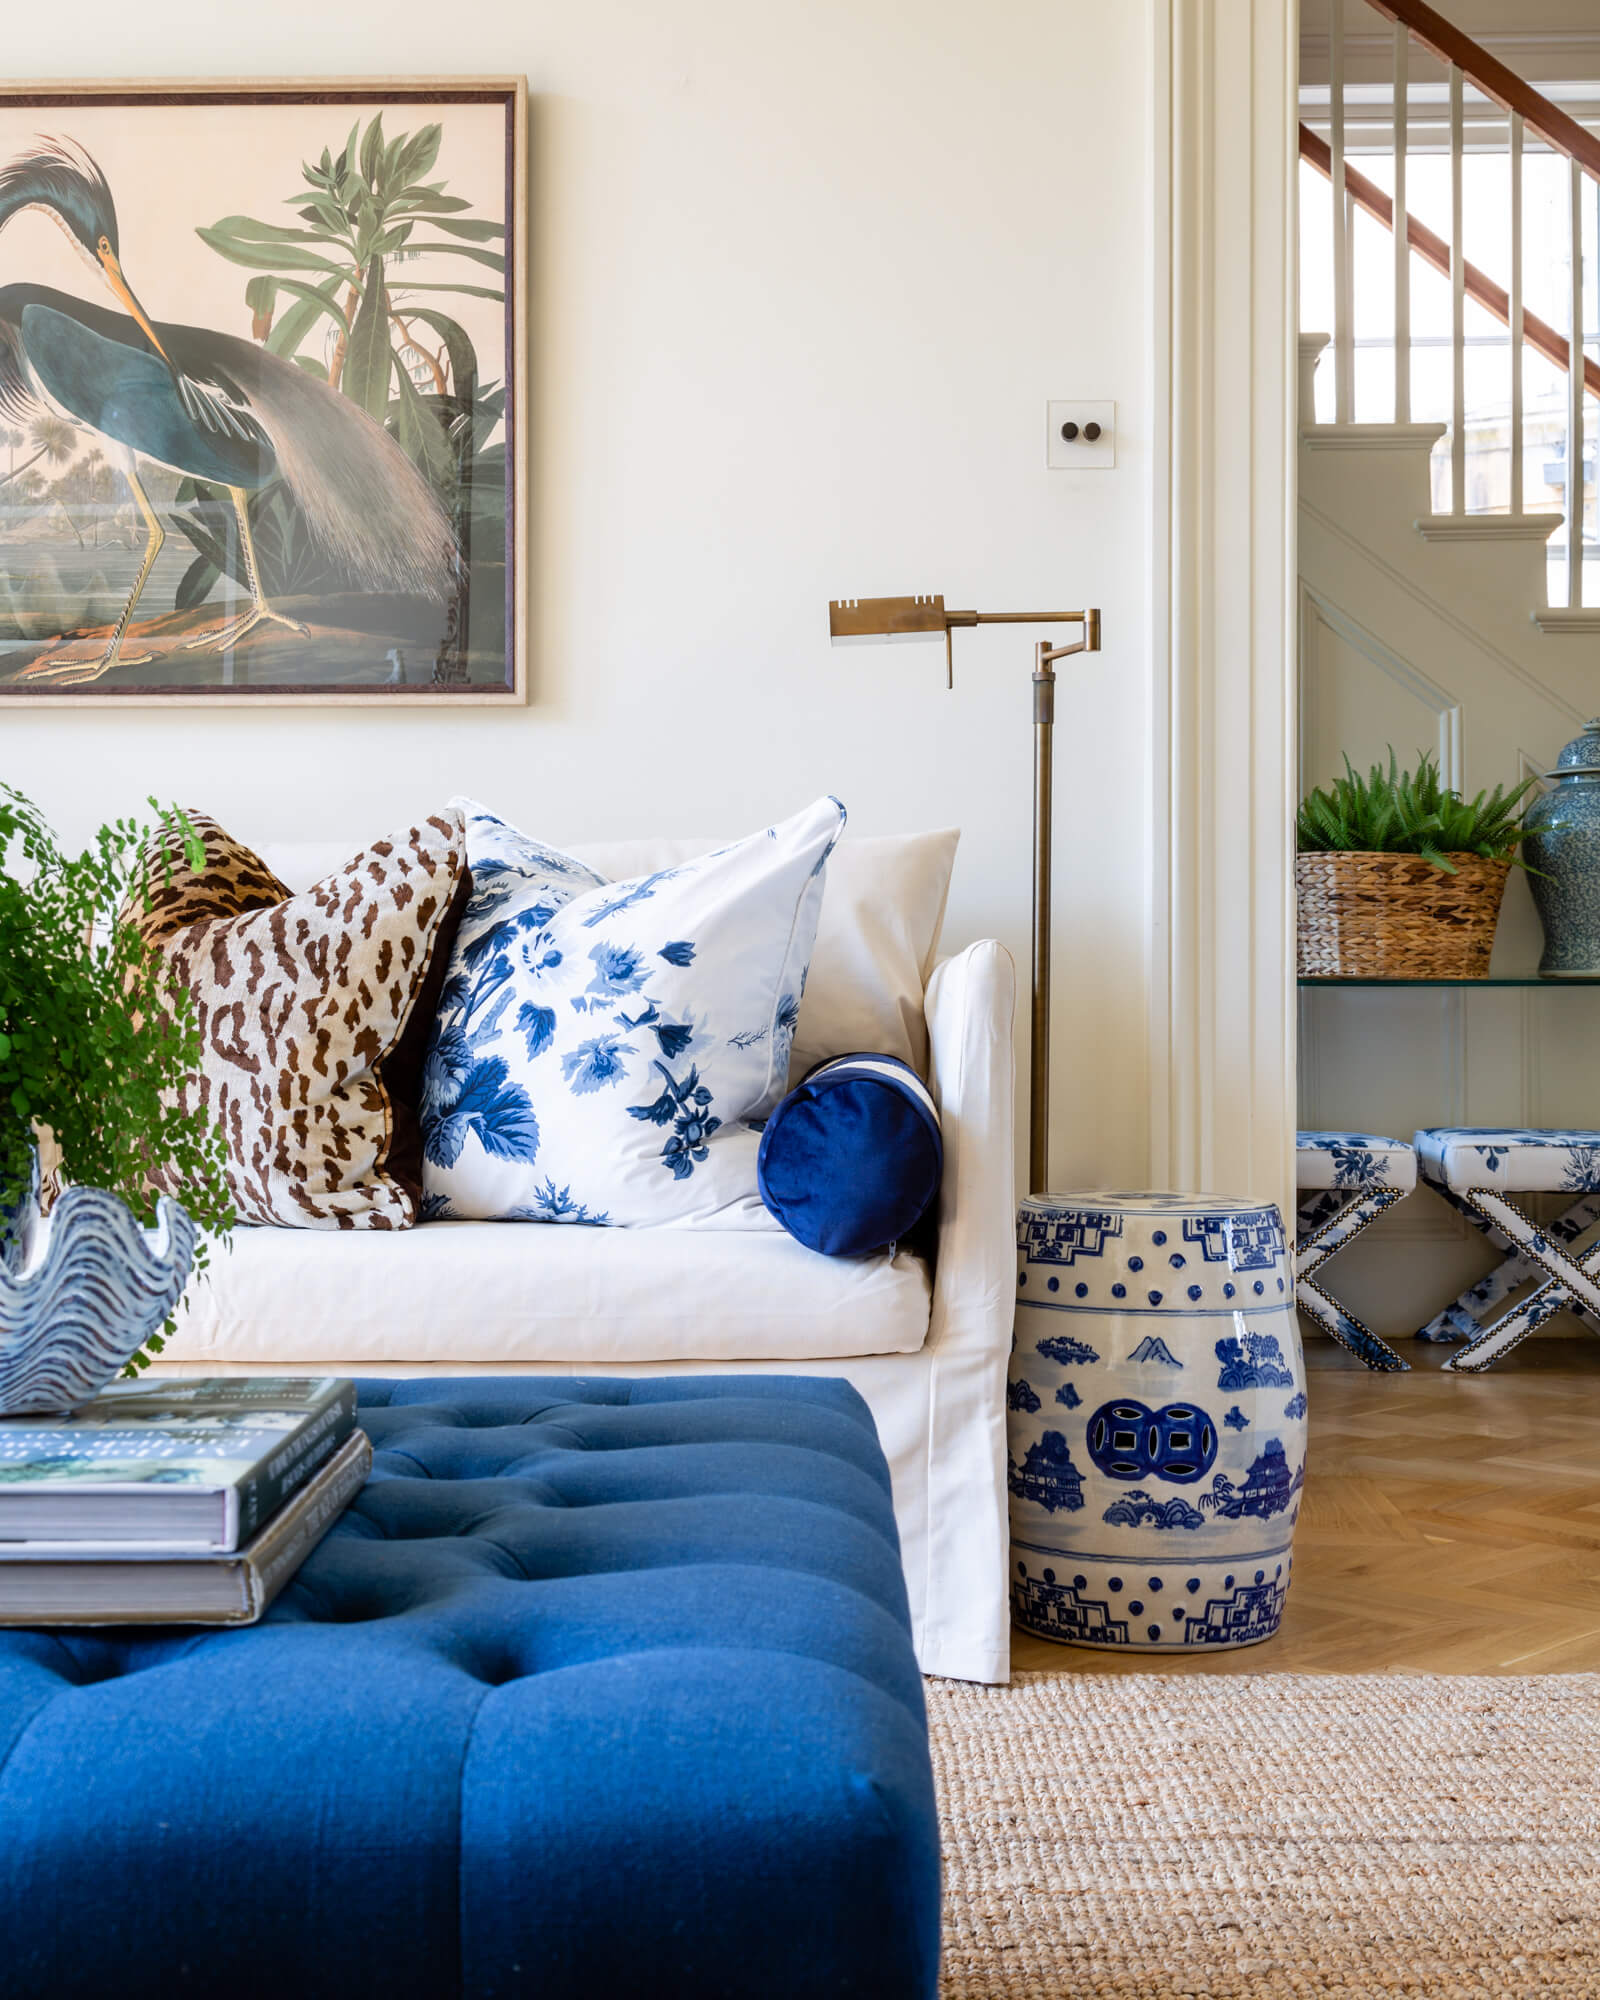 A living room with a white linen sofa, leopard cushions, a blue linen footstool, blue and white stools, and a heron bird painting on the wall